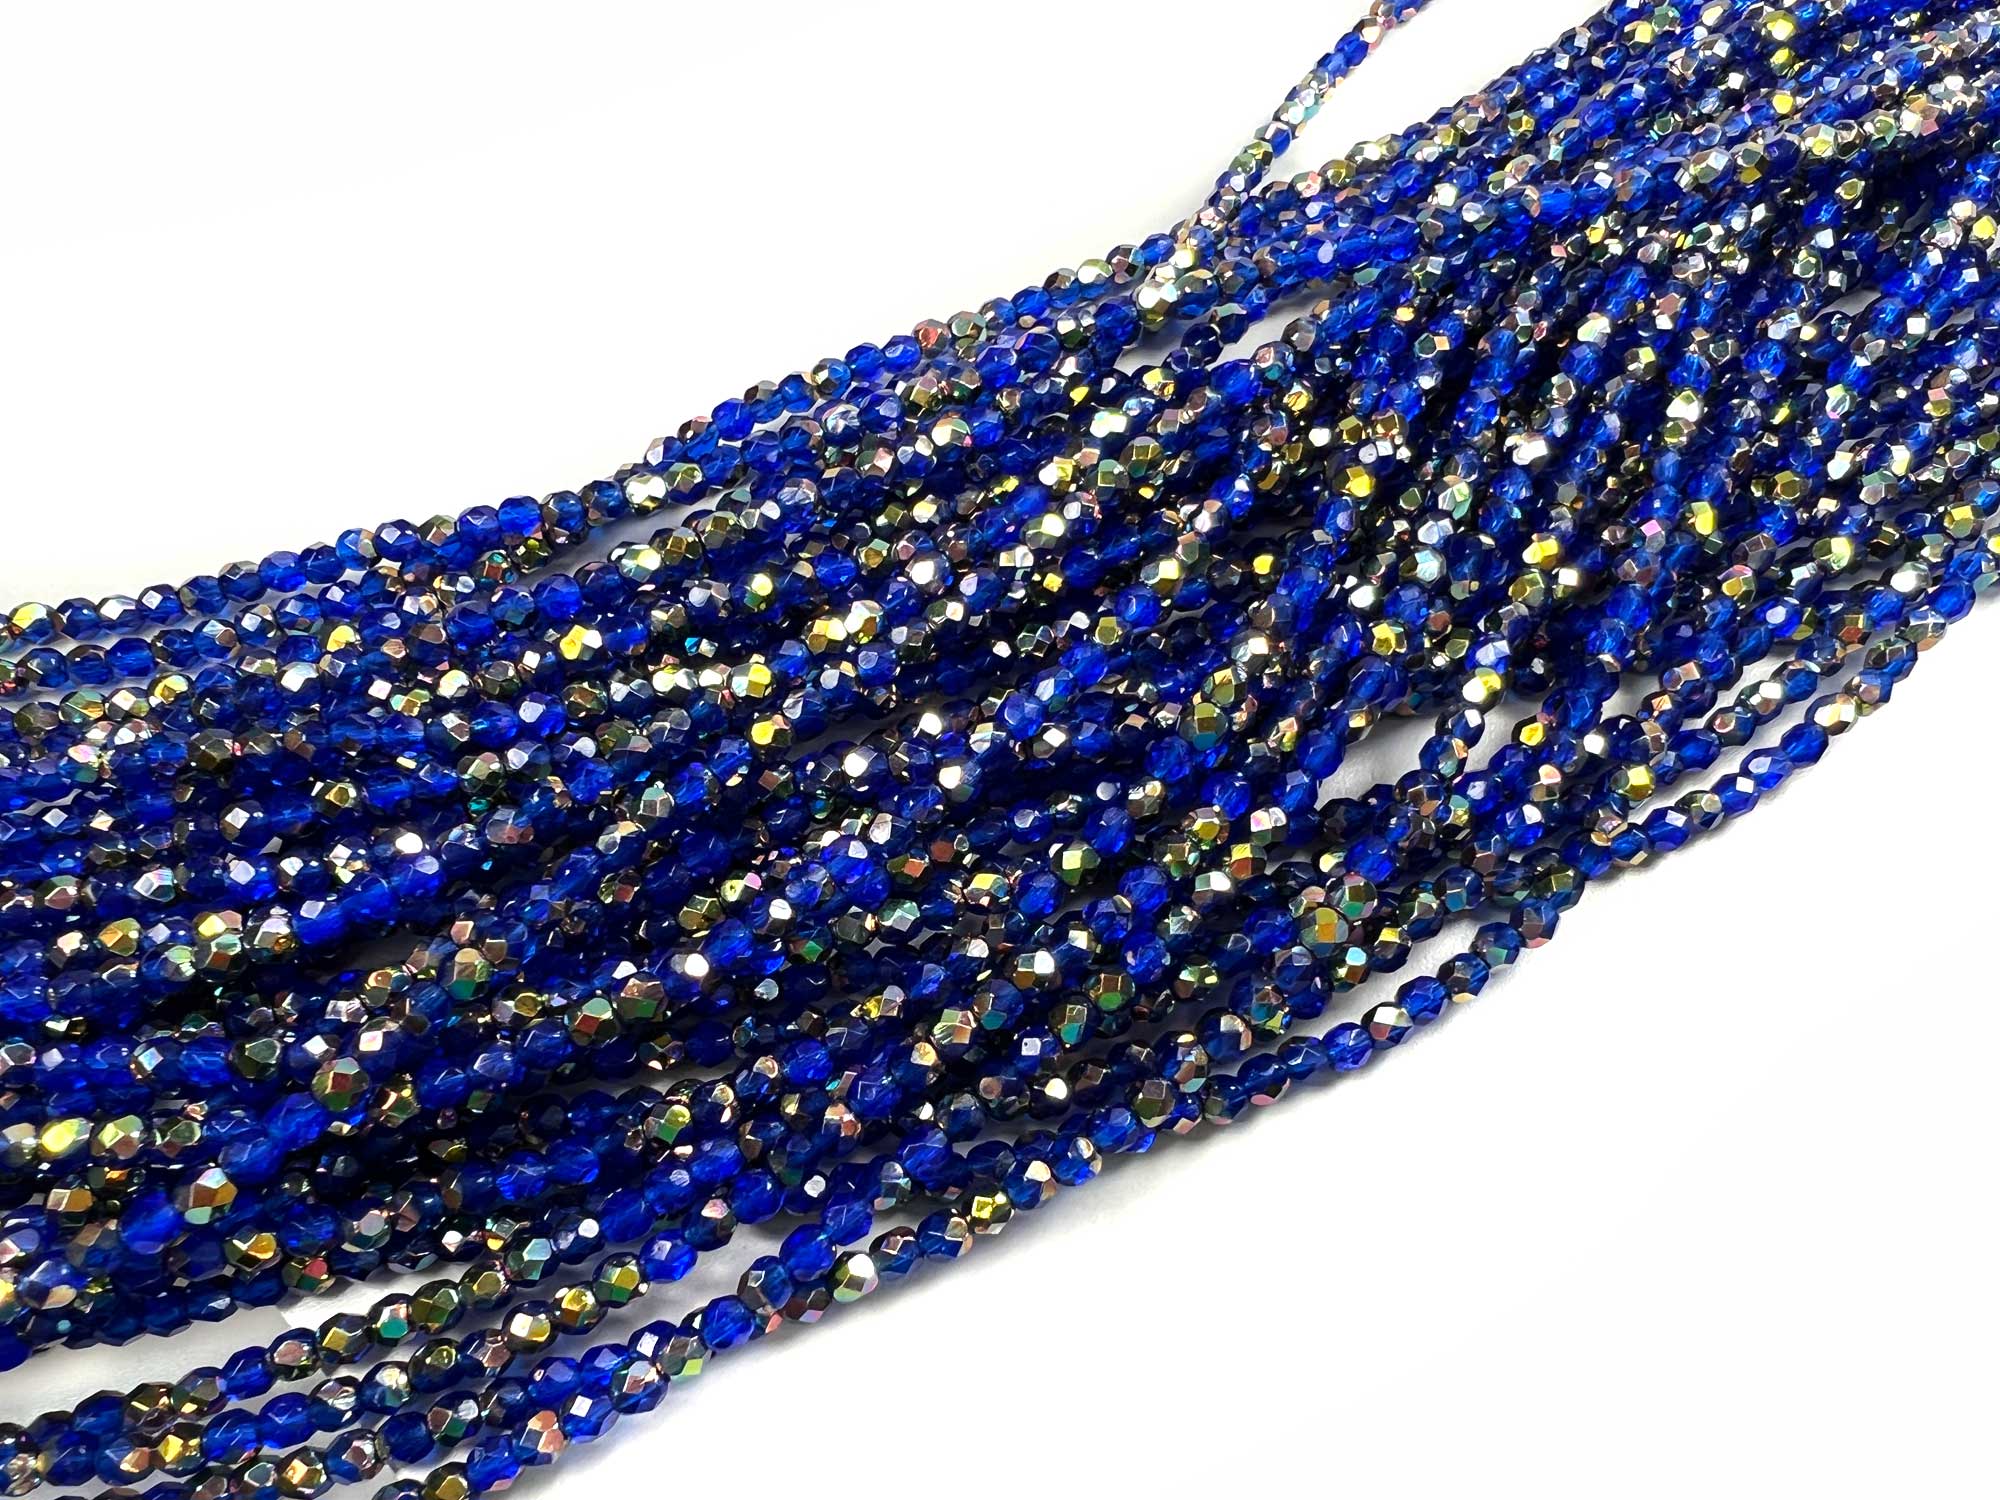 Light Cobalt Blue VITRAIL coated, Czech Fire Polished Round Faceted Glass Beads, 16 inch strand, 4mm 102pcs